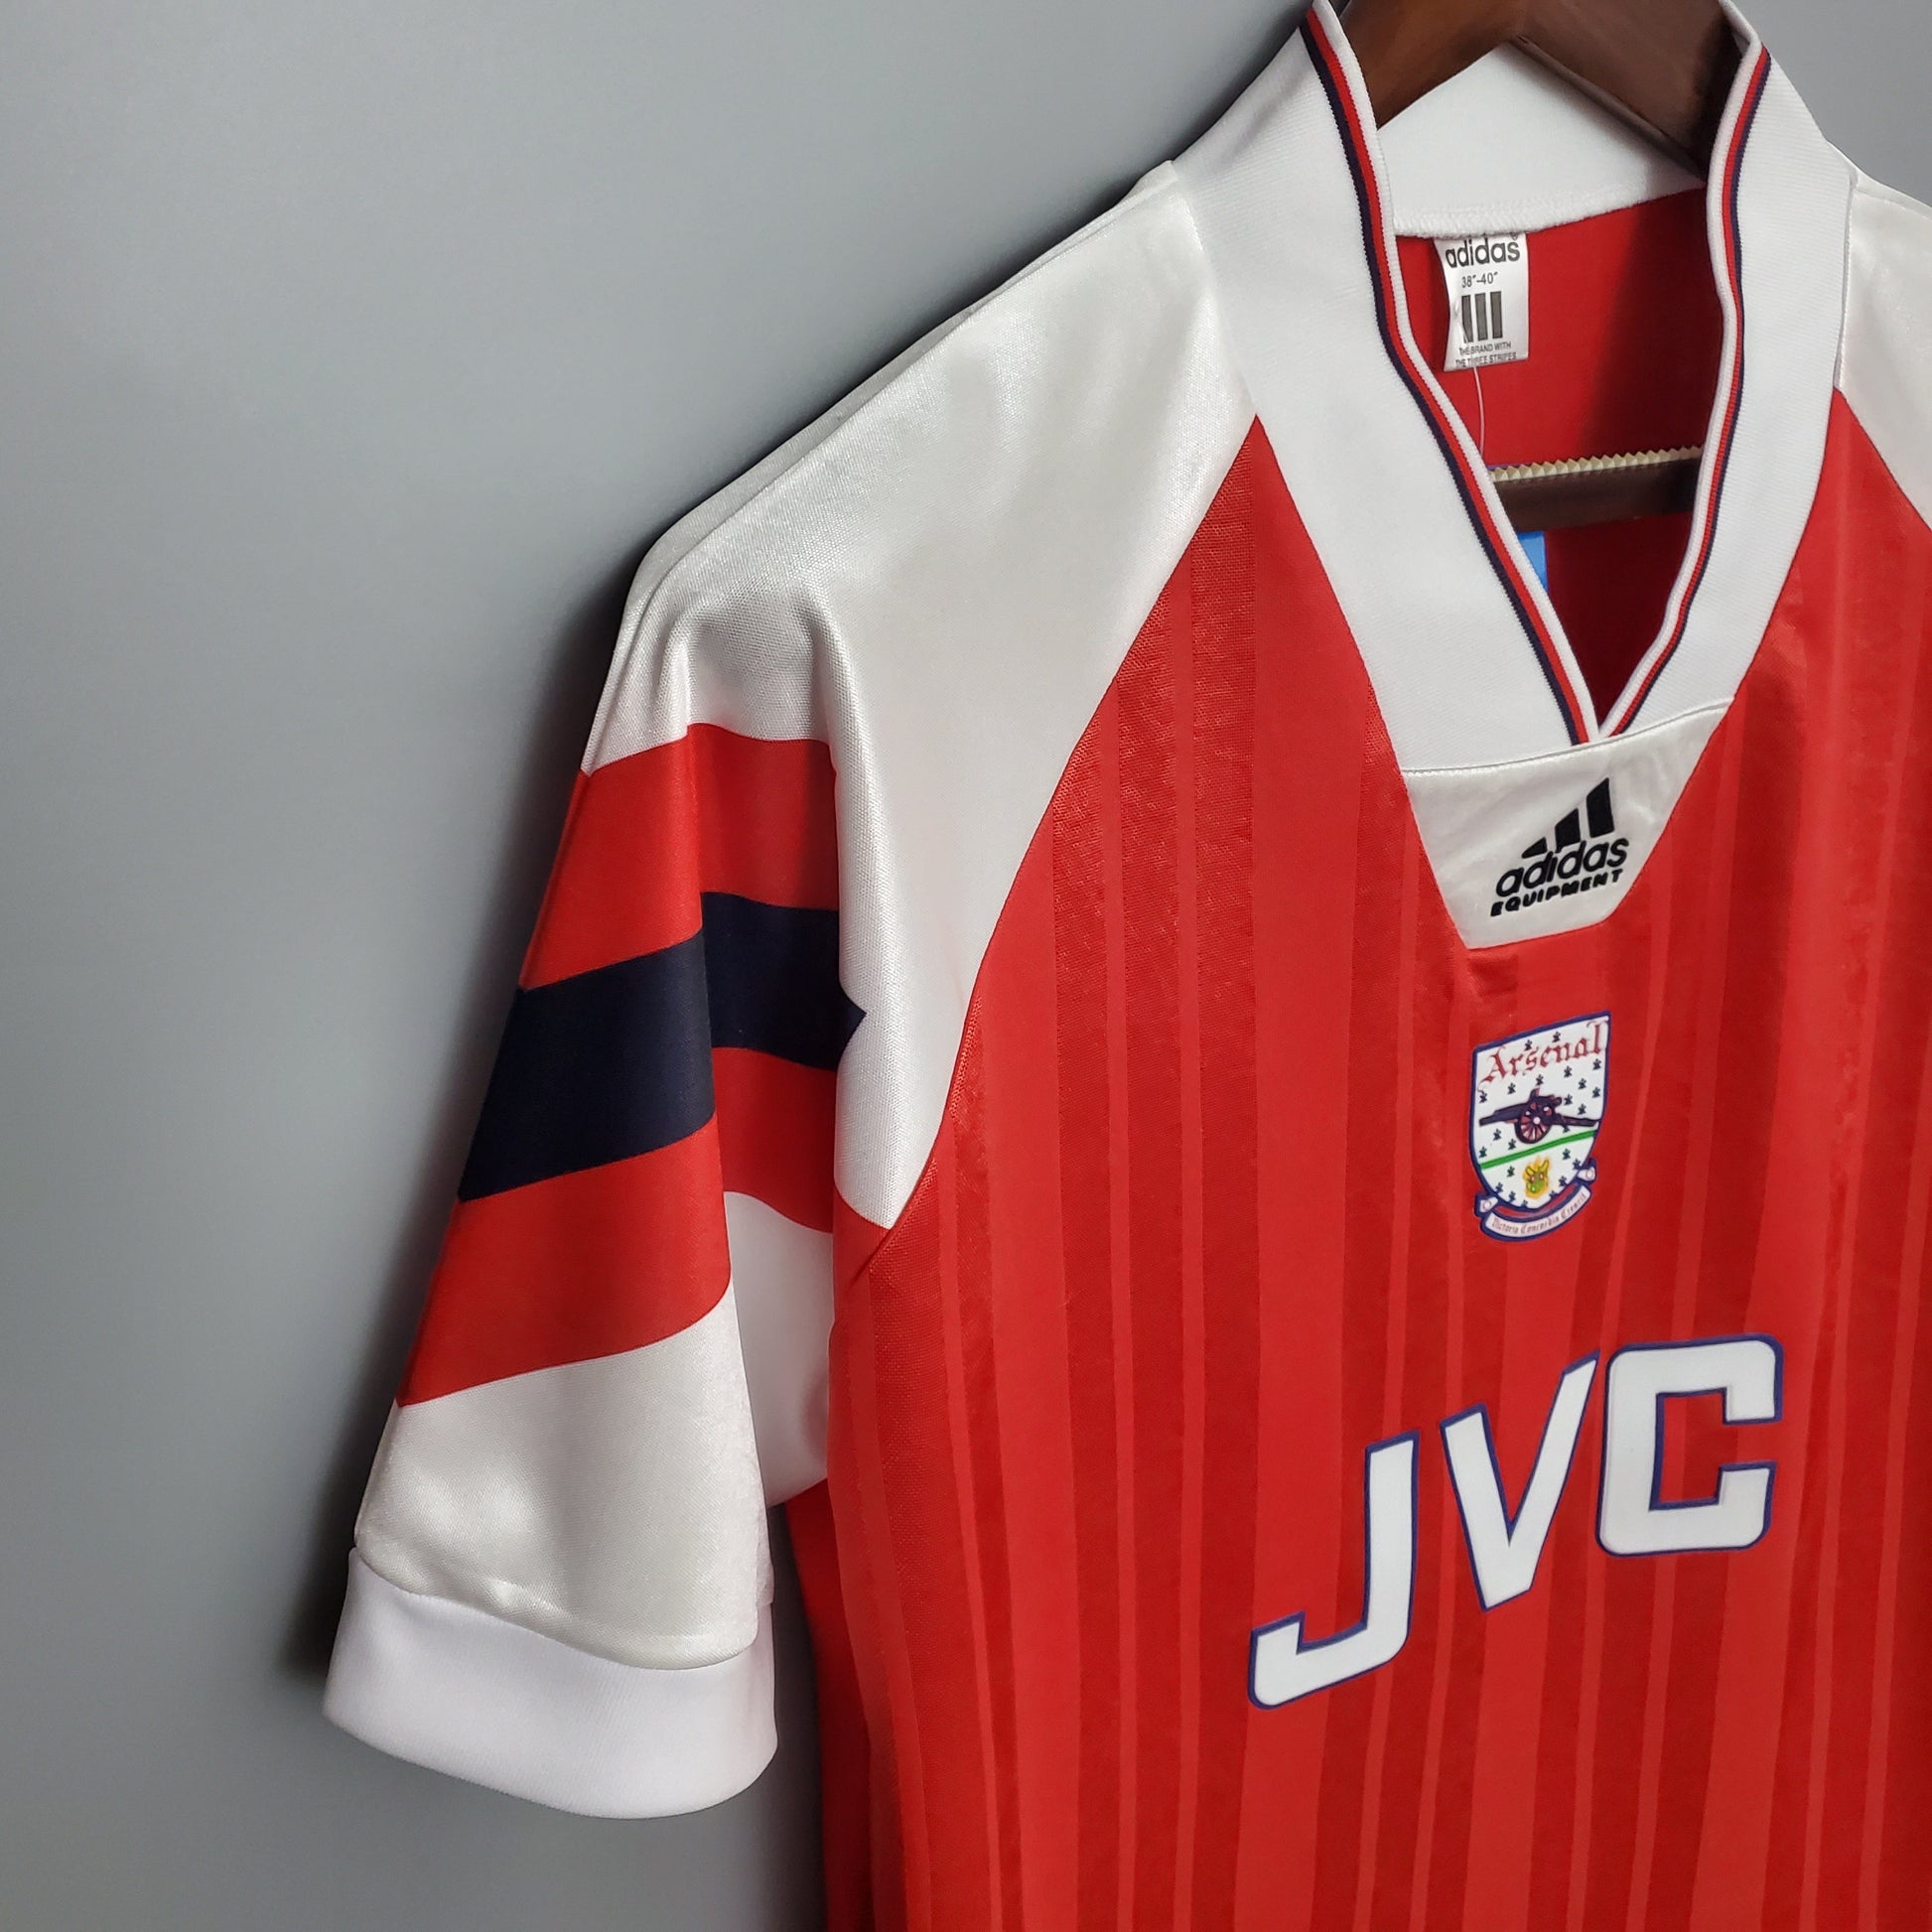 BNWT ARSENAL ADIDAS L 91-93 Red Home Shirt 2020 Re-issue H31143 X